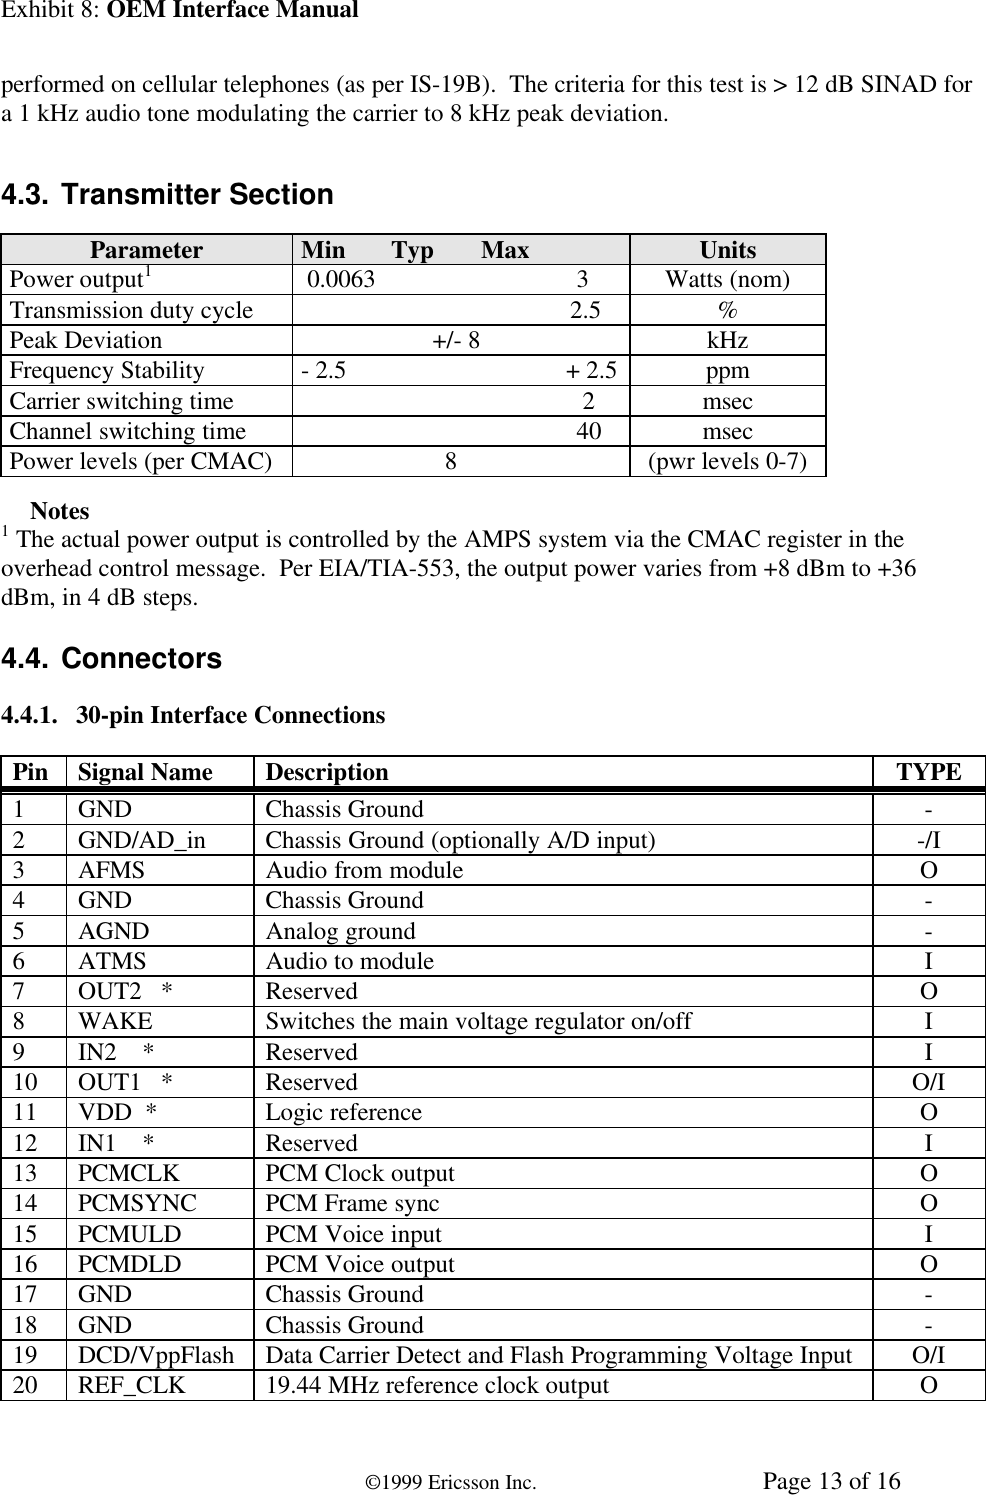 Exhibit 8: OEM Interface Manual©1999 Ericsson Inc. Page 13 of 16performed on cellular telephones (as per IS-19B).  The criteria for this test is &gt; 12 dB SINAD fora 1 kHz audio tone modulating the carrier to 8 kHz peak deviation.4.3. Transmitter SectionParameter Min Typ Max UnitsPower output1 0.0063                                3 Watts (nom)Transmission duty cycle                                            2.5 %Peak Deviation                      +/- 8 kHzFrequency Stability - 2.5                                   + 2.5 ppmCarrier switching time                                              2 msecChannel switching time                                             40 msecPower levels (per CMAC)                        8 (pwr levels 0-7)ÜÜ Notes1 The actual power output is controlled by the AMPS system via the CMAC register in theoverhead control message.  Per EIA/TIA-553, the output power varies from +8 dBm to +36dBm, in 4 dB steps.4.4. Connectors4.4.1. 30-pin Interface ConnectionsPin Signal Name Description TYPE1GND Chassis Ground -2GND/AD_in Chassis Ground (optionally A/D input) -/I3AFMS Audio from module O4GND Chassis Ground -5AGND Analog ground -6ATMS Audio to module I7OUT2   * Reserved O8WAKE Switches the main voltage regulator on/off I9IN2    * Reserved I10 OUT1   * Reserved O/I11 VDD  * Logic reference O12 IN1    * Reserved I13 PCMCLK PCM Clock output O14 PCMSYNC PCM Frame sync O15 PCMULD PCM Voice input I16 PCMDLD PCM Voice output O17 GND Chassis Ground -18 GND Chassis Ground -19 DCD/VppFlash Data Carrier Detect and Flash Programming Voltage Input O/I20 REF_CLK 19.44 MHz reference clock output O